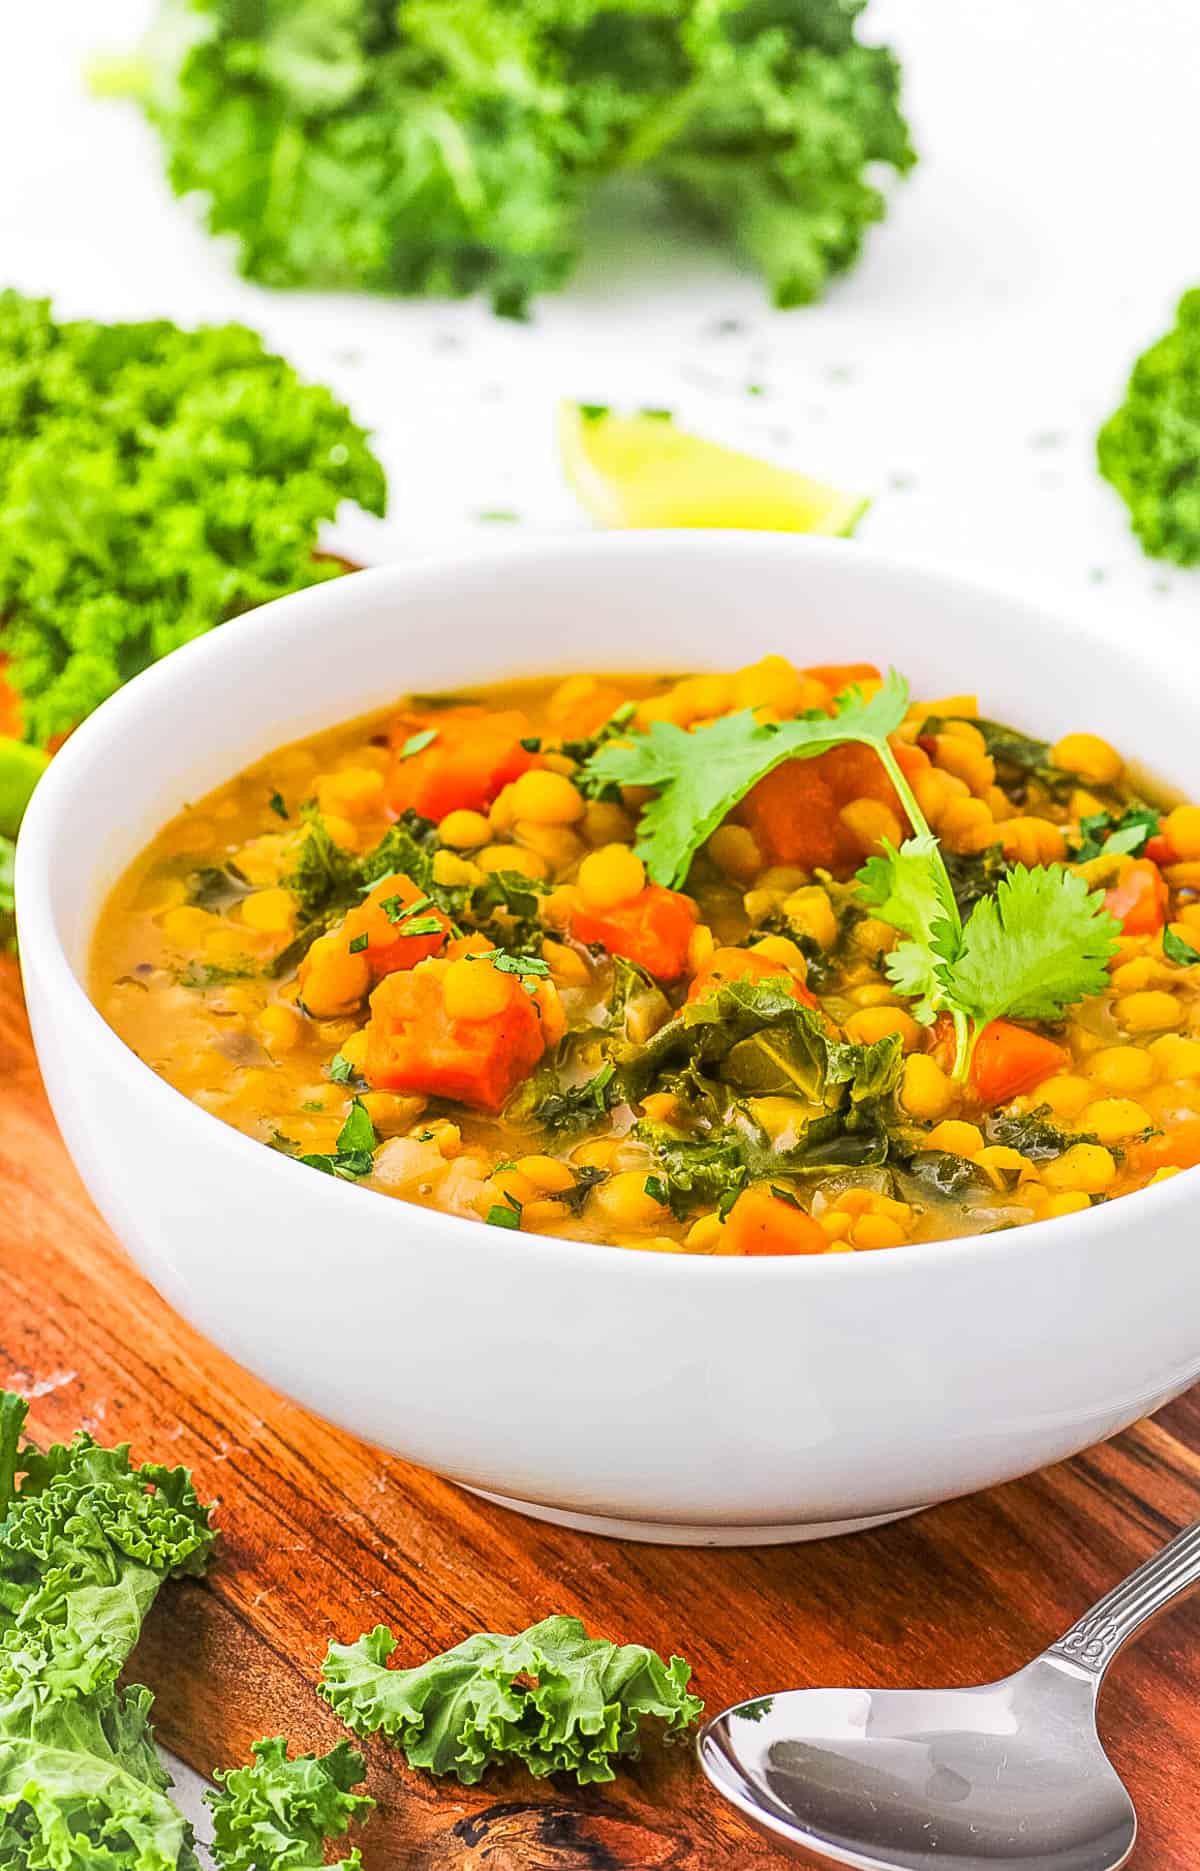 Sweet potato dahl served in a bowl, garnished with cilantro.